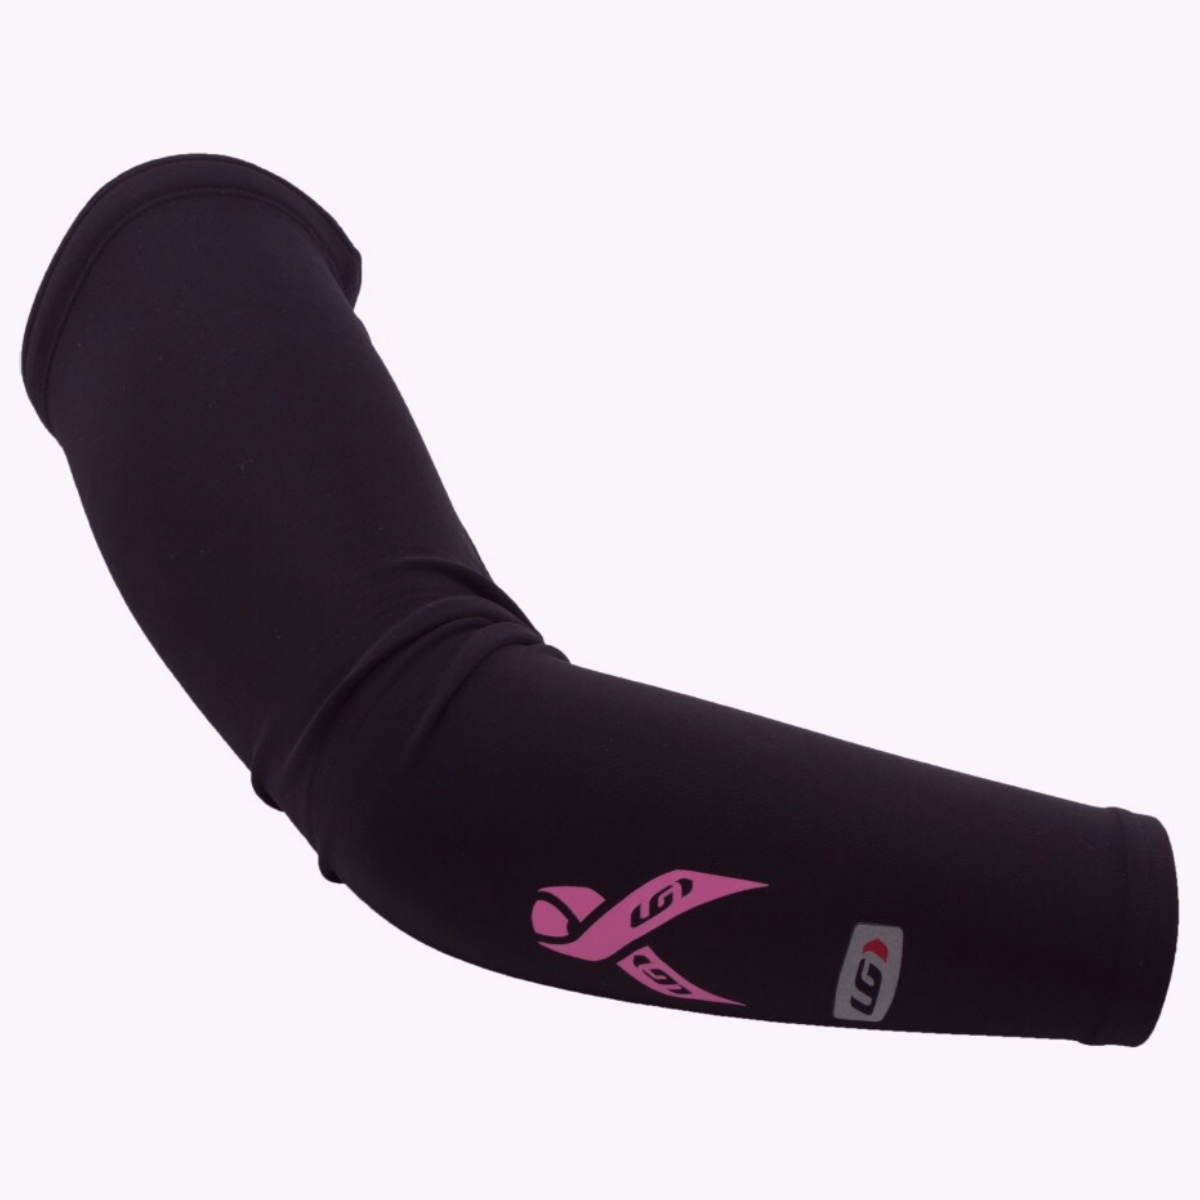 Riding pink arm warmers